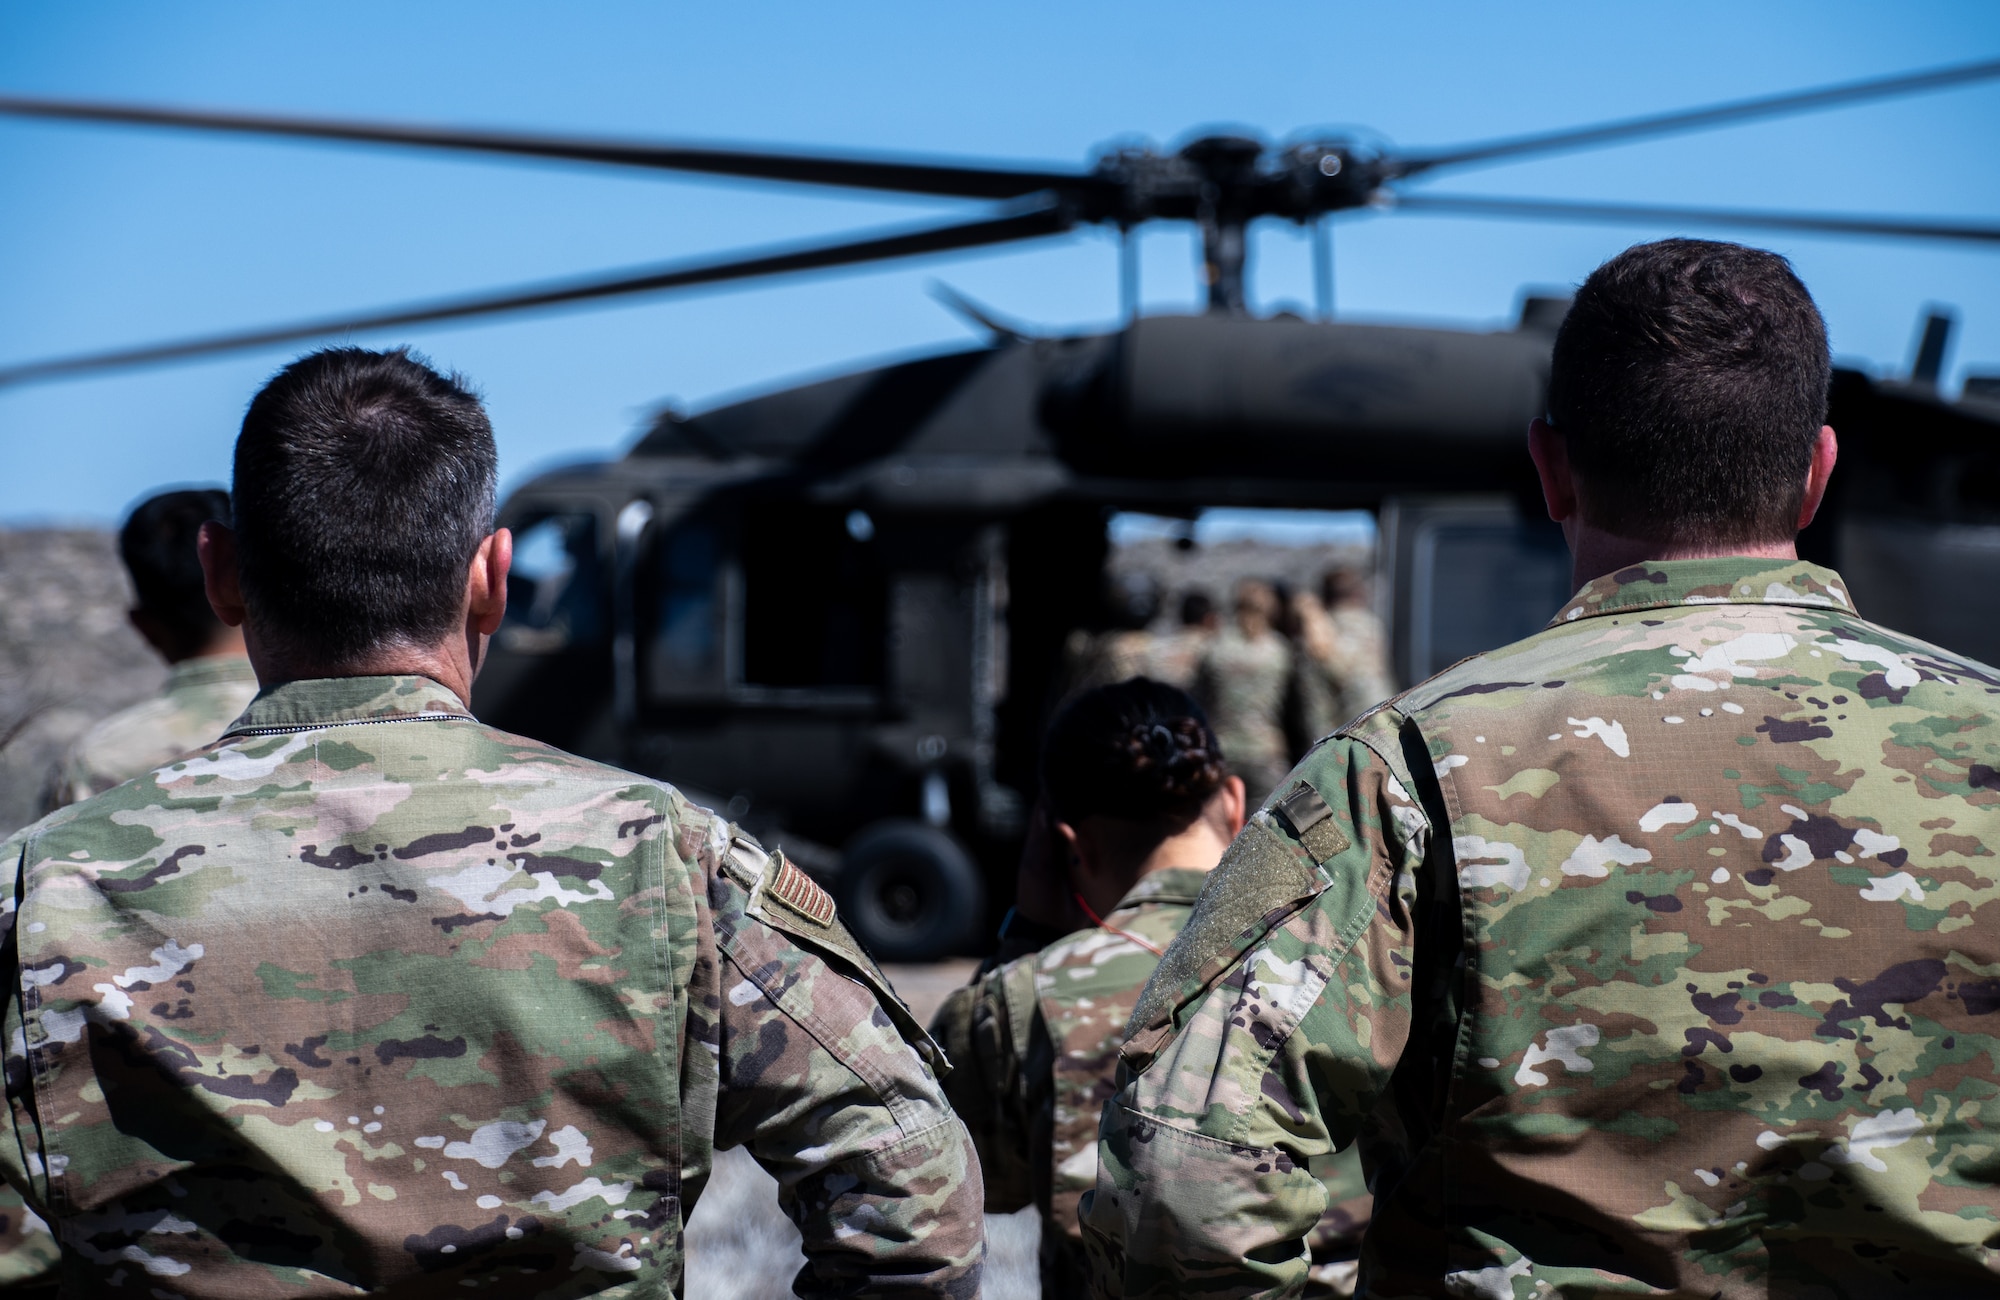 Airmen from the 152nd Medical Group joined forces with the Nevada Army National Guard in Stead, Nev. on April 10, 2021. The Airmen practiced hot and cold loading litter training exercises with UH-60 Black Hawk aircraft.